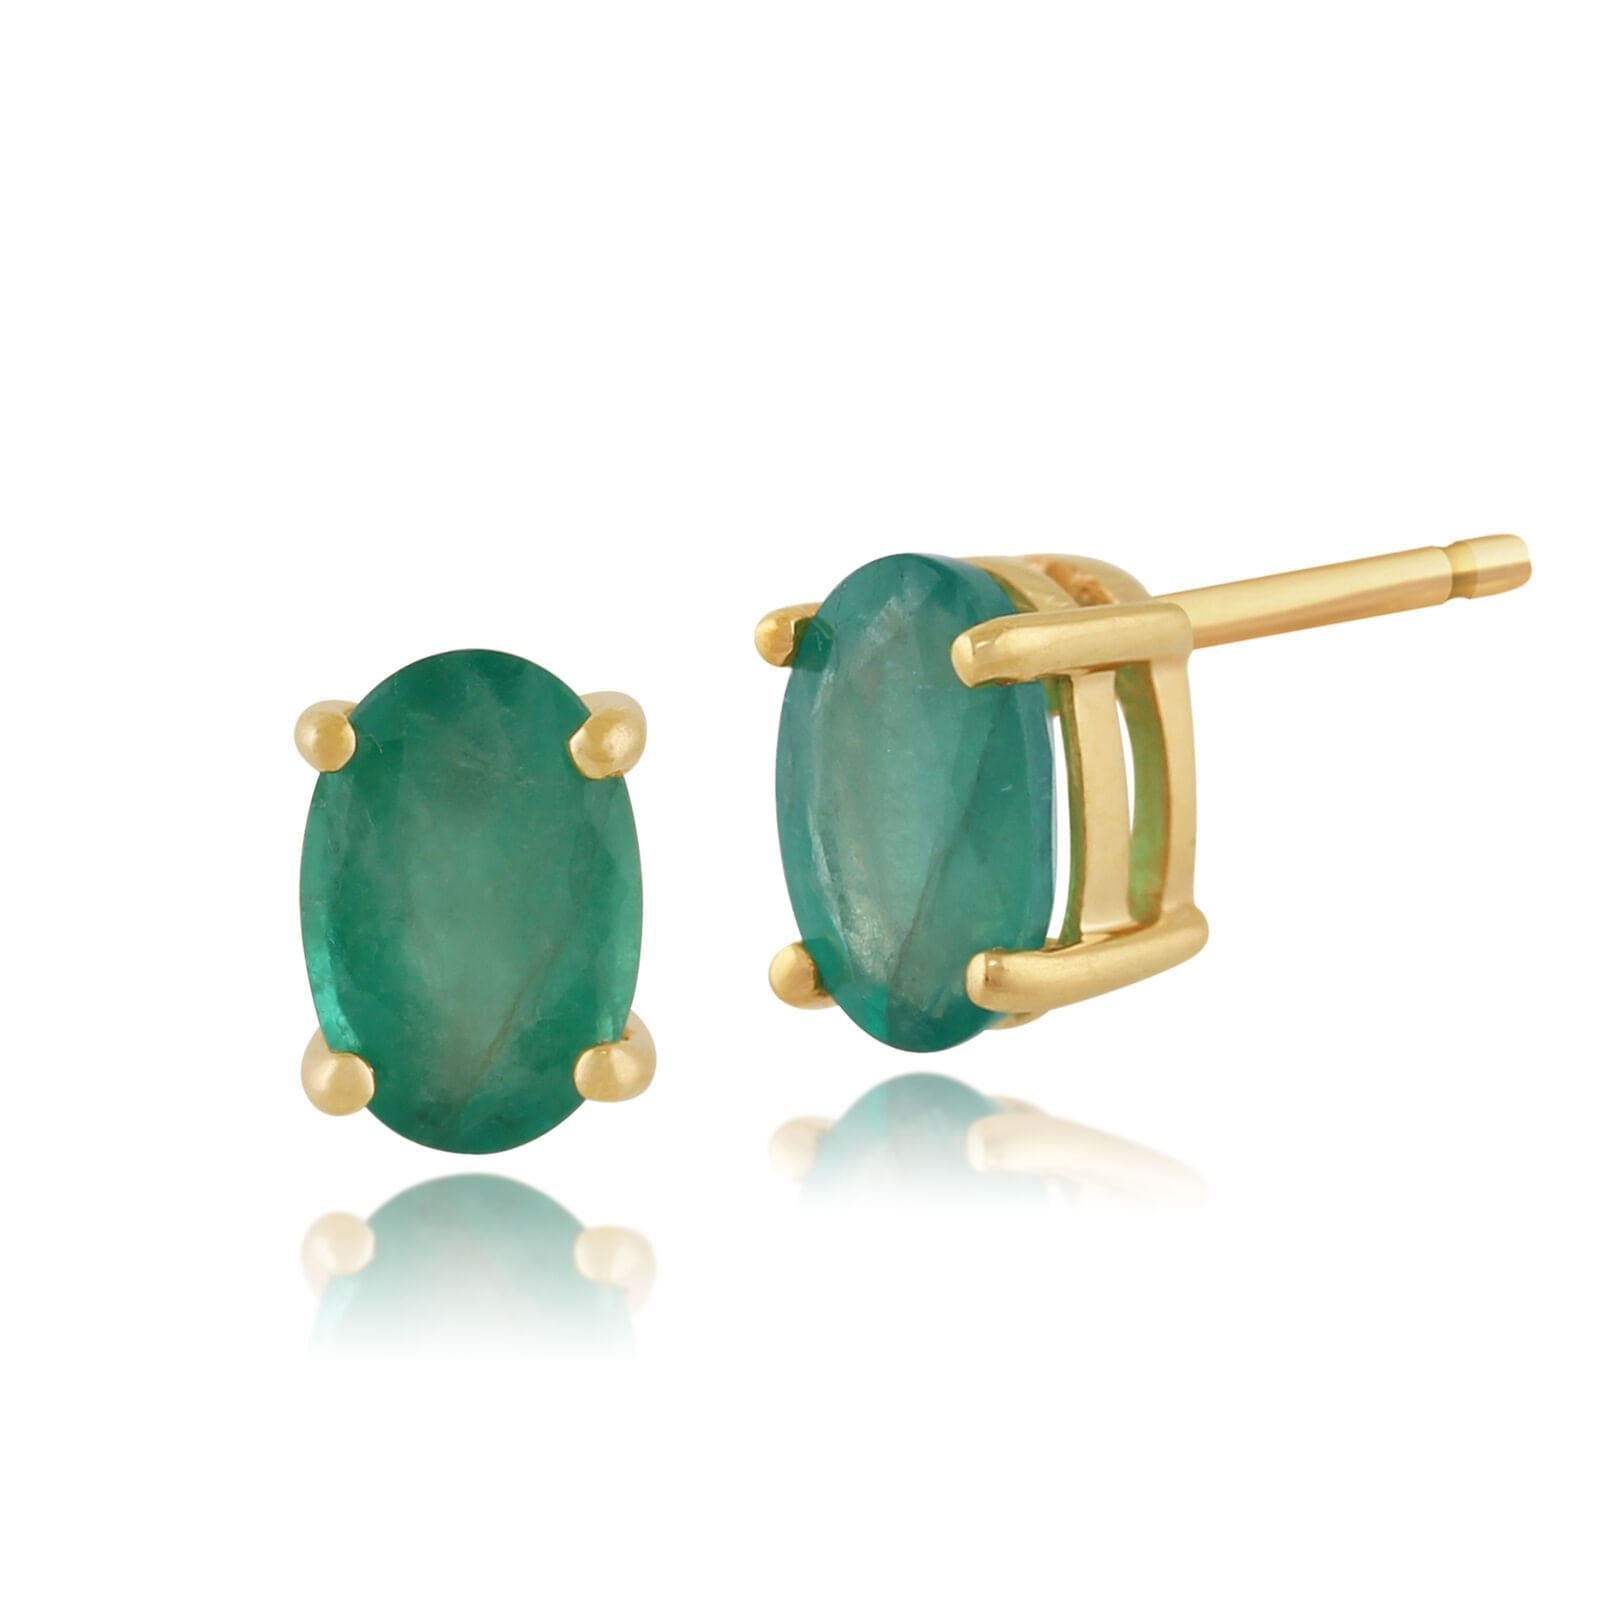 Classic Oval Emerald Stud Earrings in 9ct Yellow Gold 6x4mm